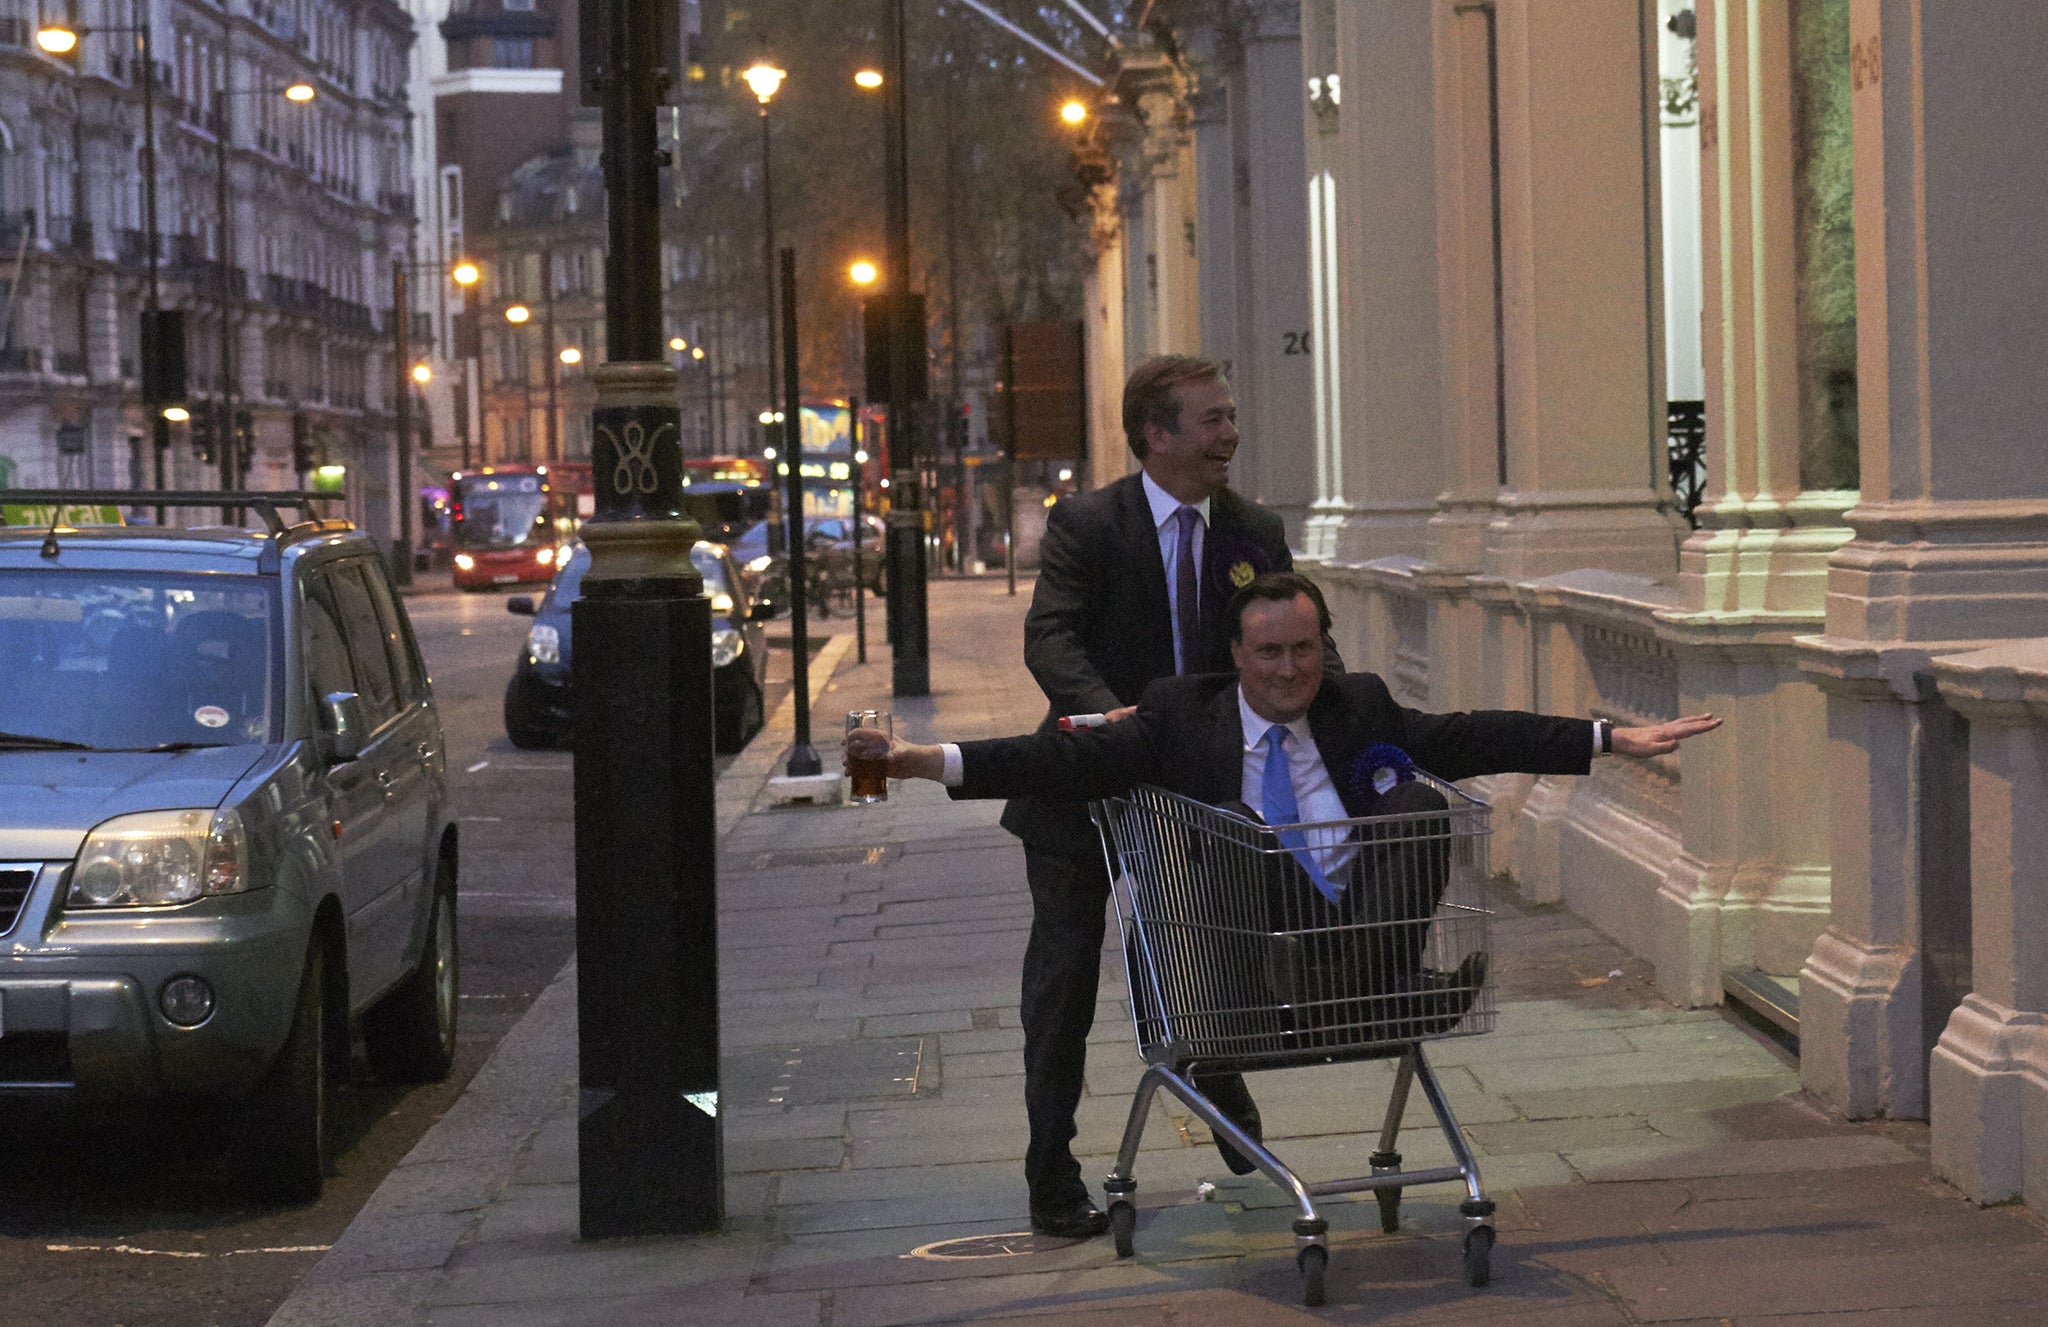 Nigel Farage and David Cameron exhibit high spirits following election success...imagined by Alison Jackson